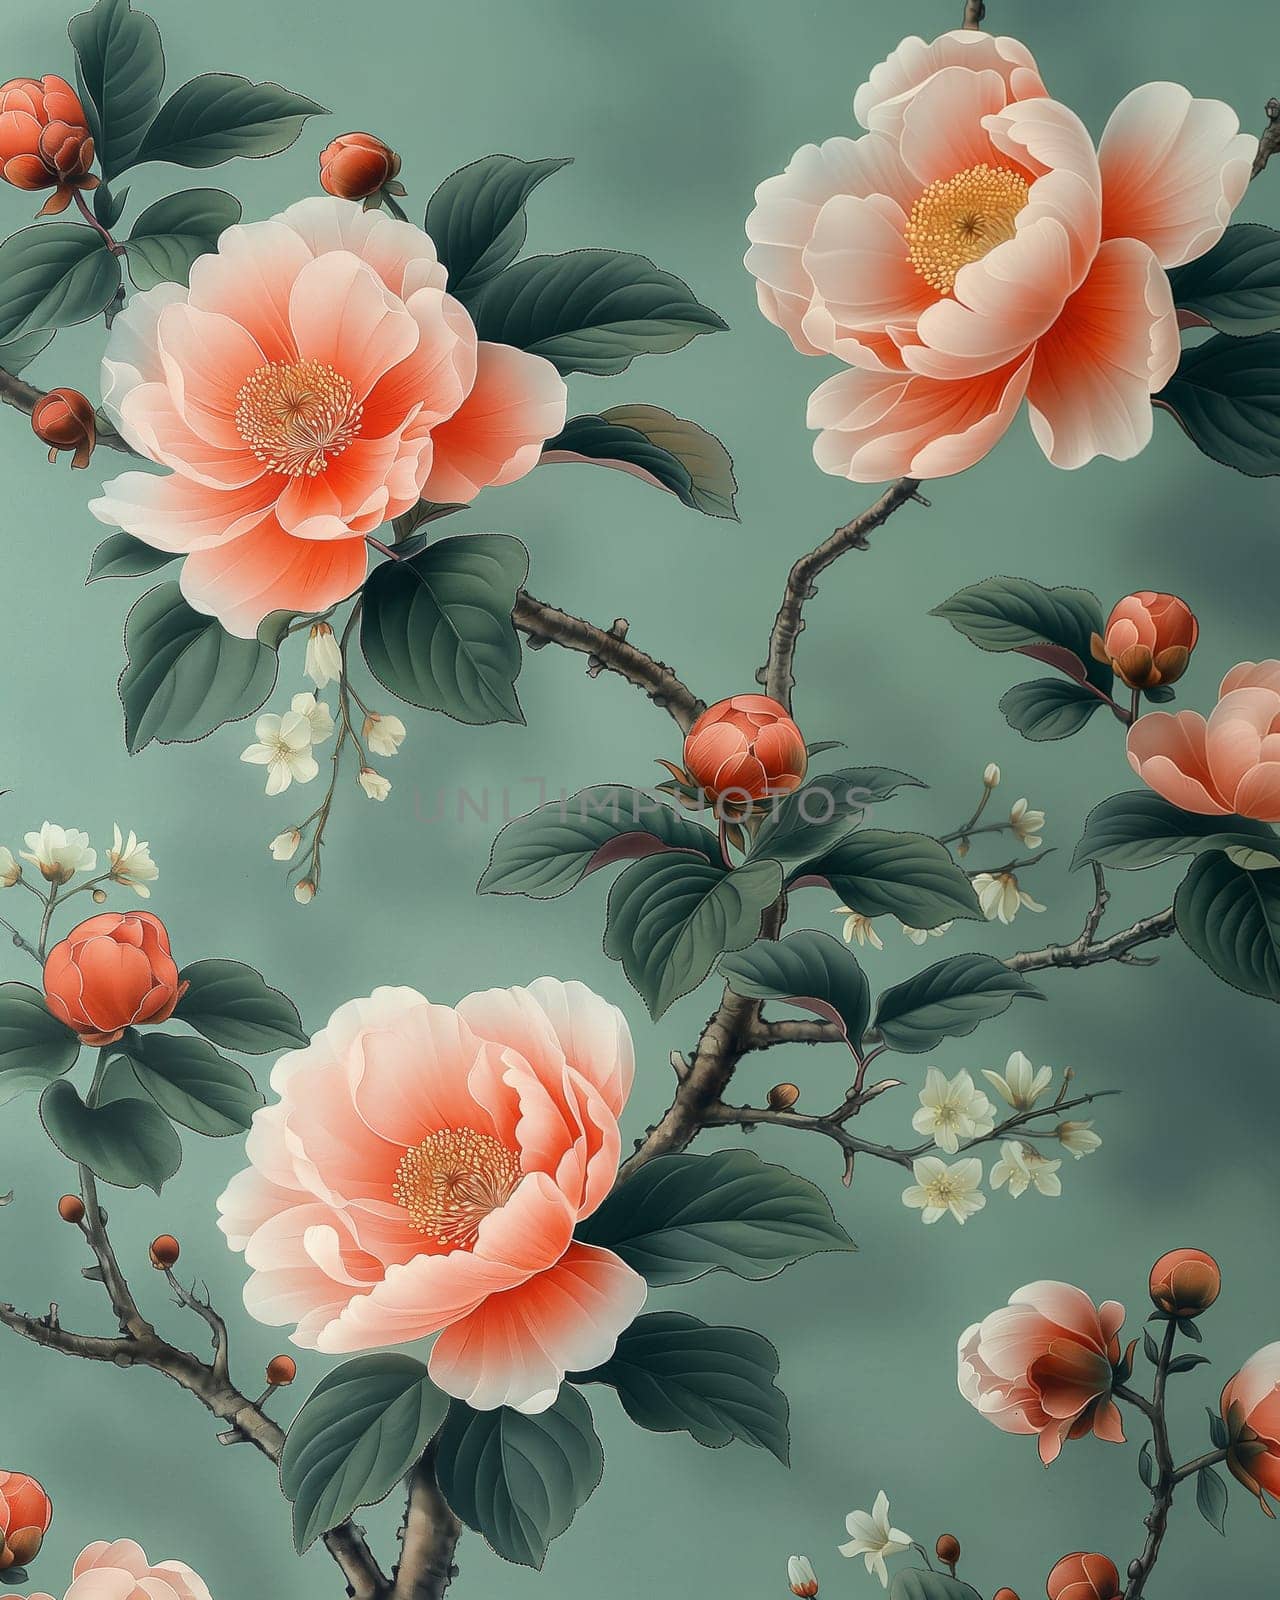 Wallpaper in chinoiserie style depicting large flower. Selective focus.